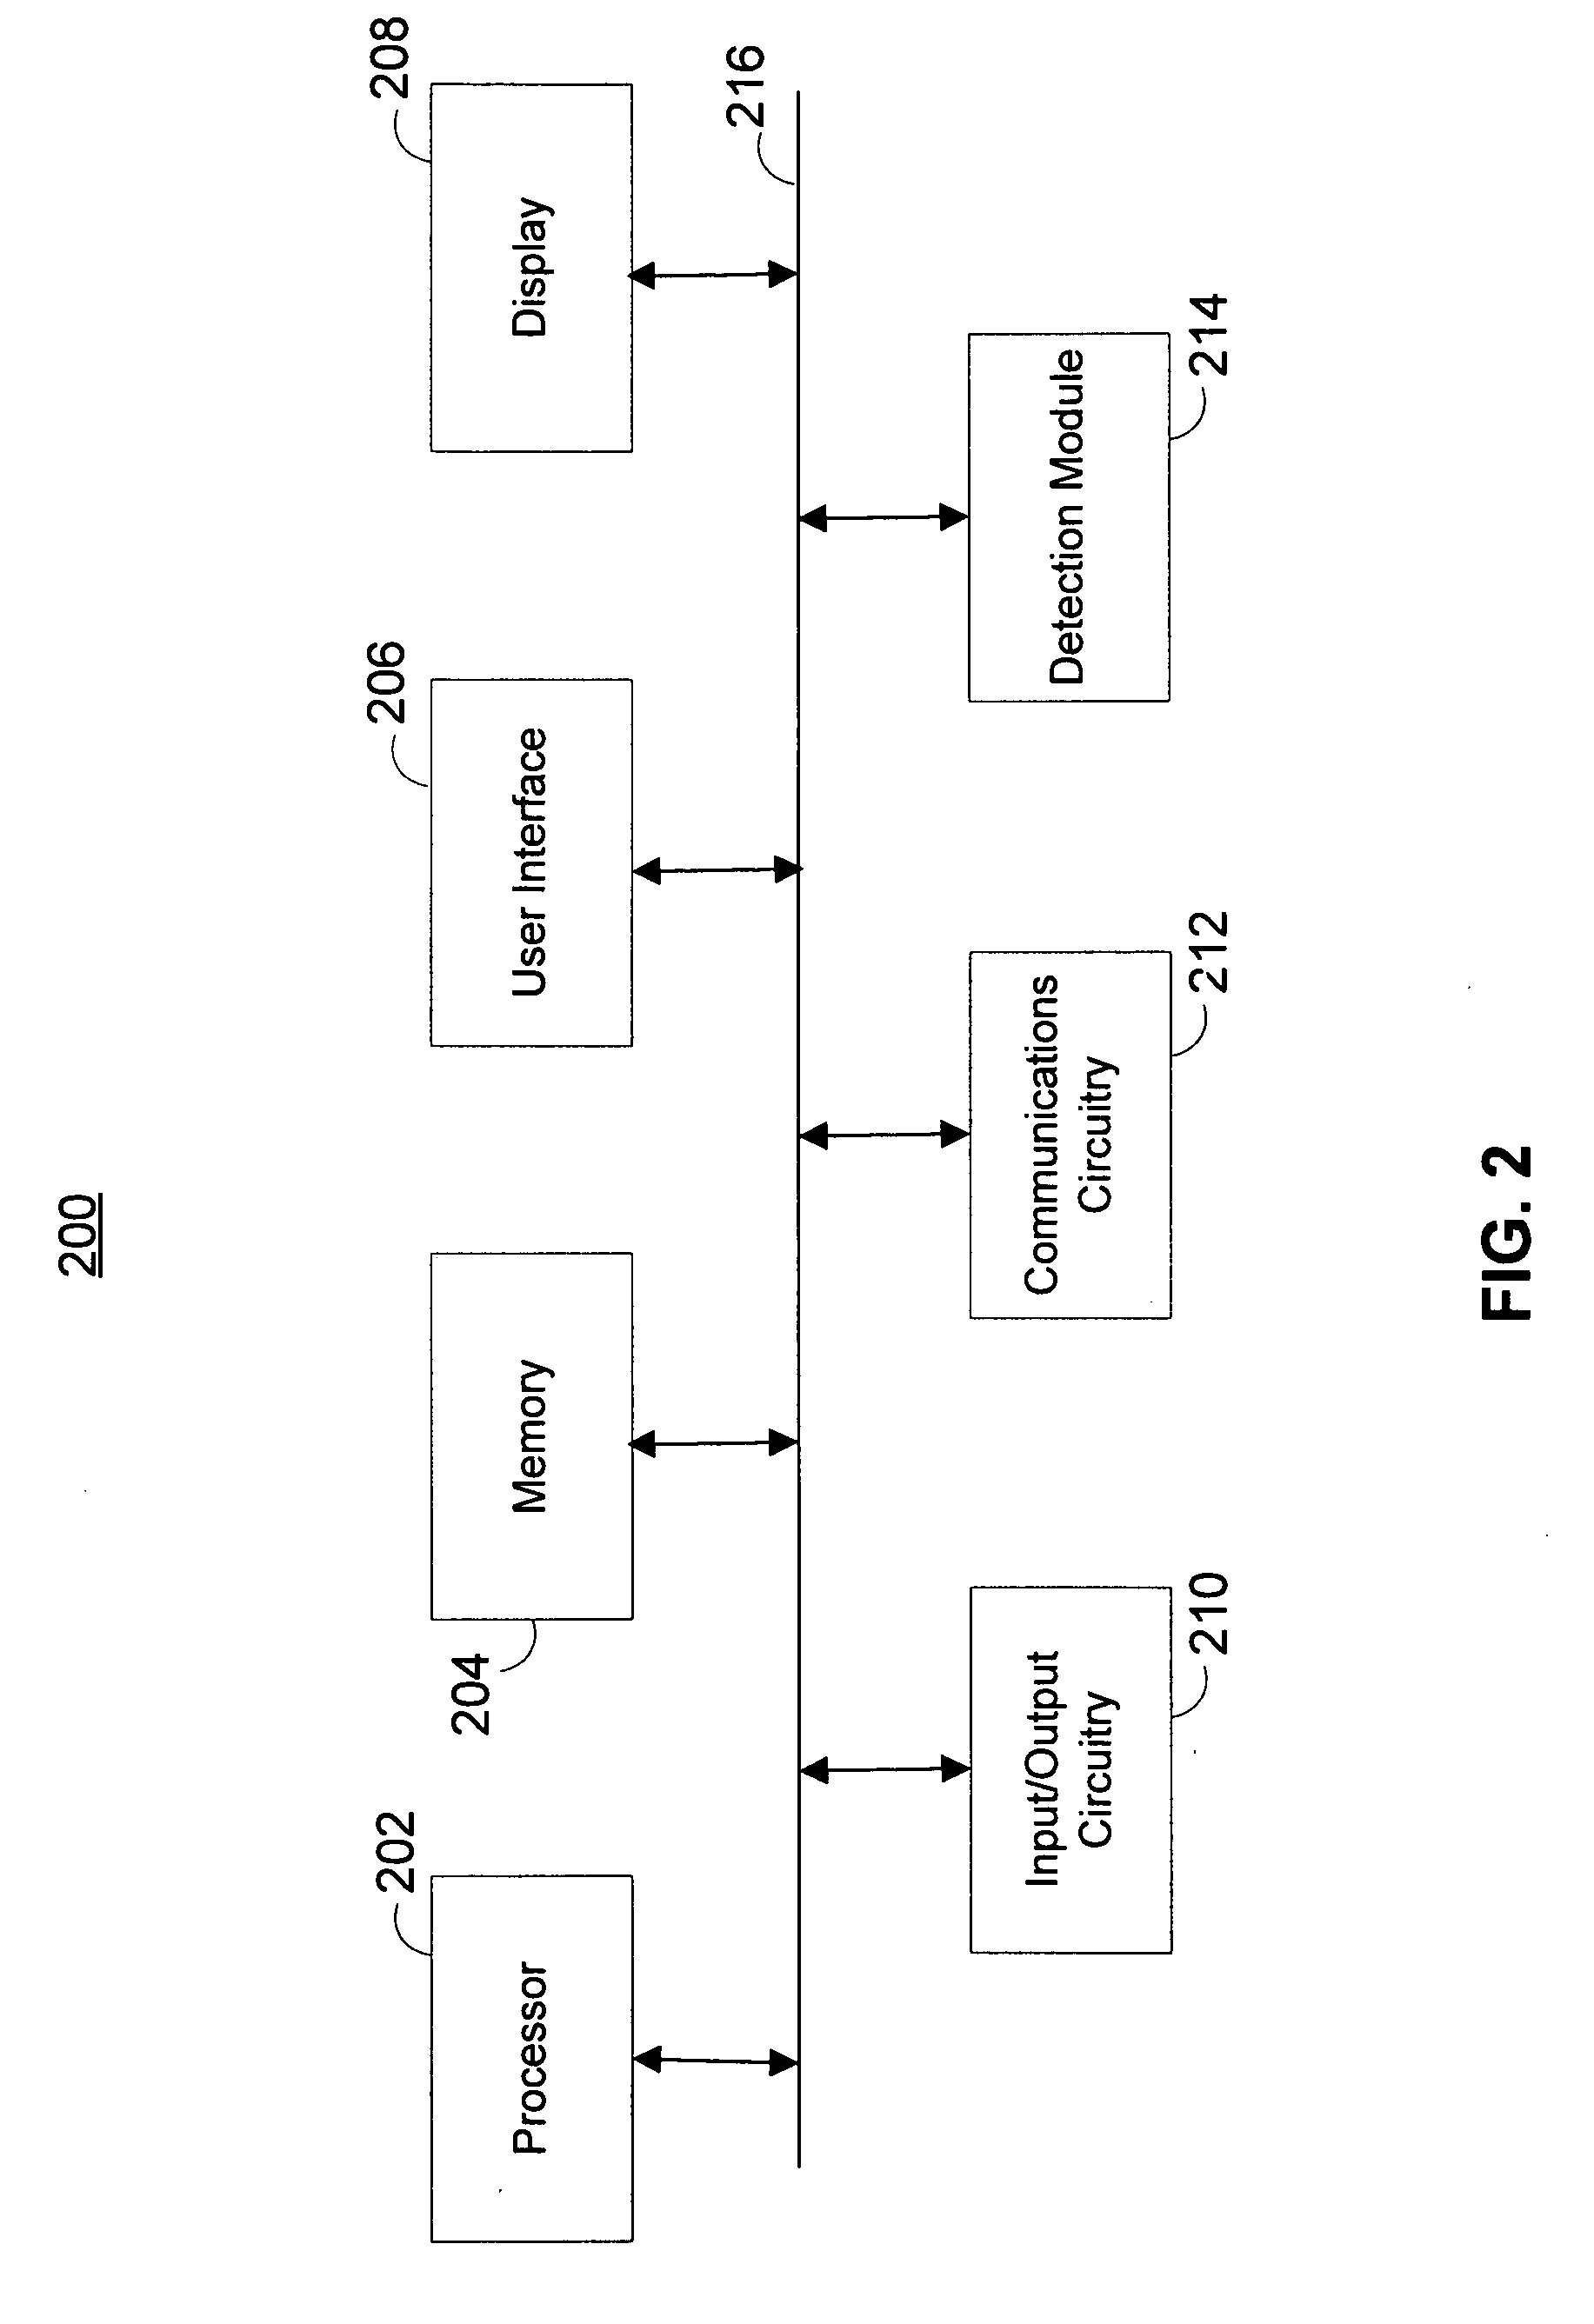 Systems and methods for intelligent and customizable communications between devices